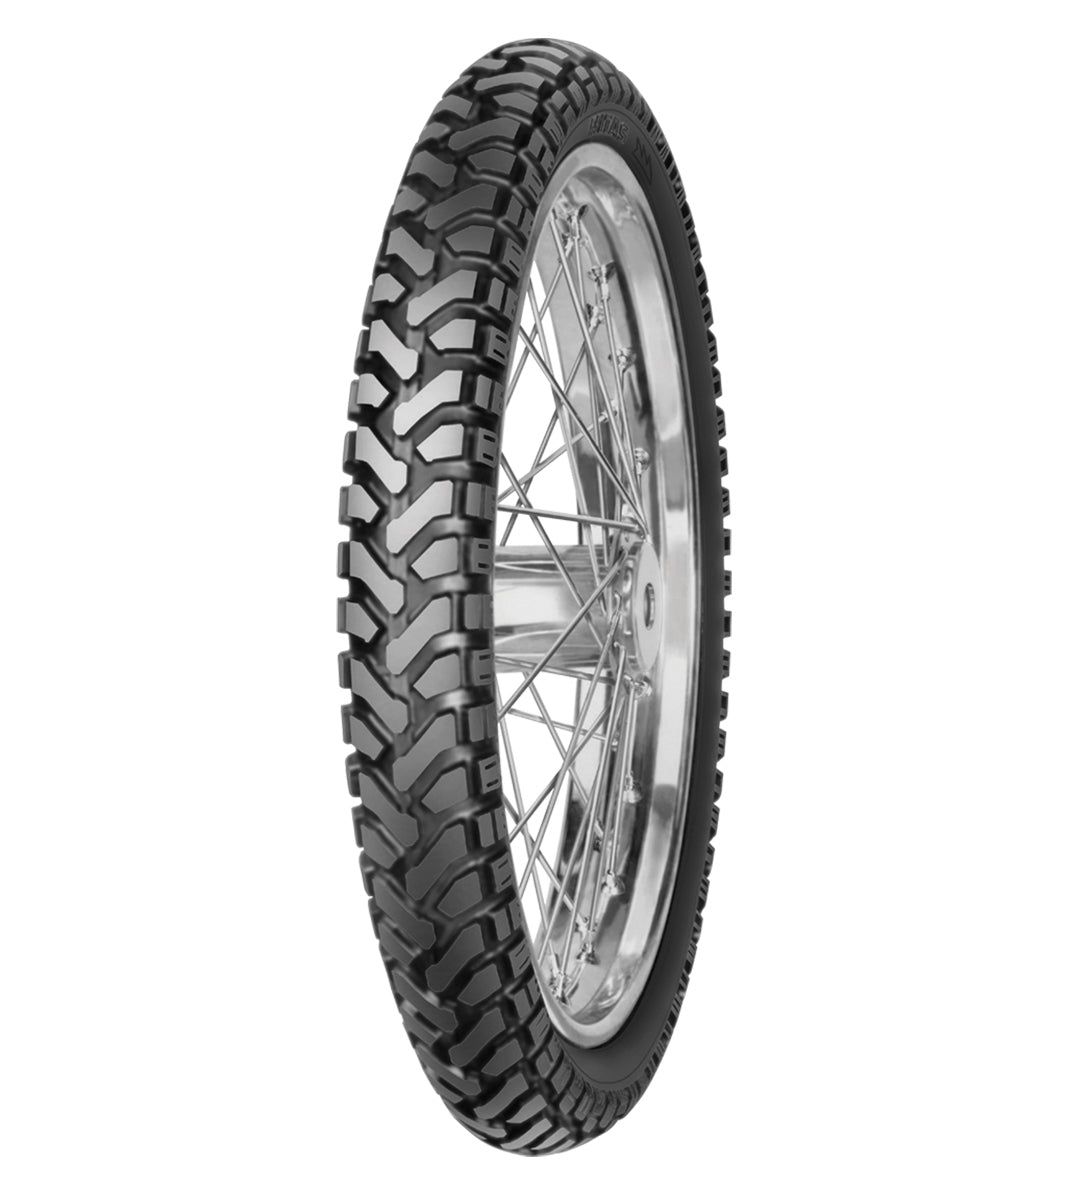 Mitas E-07 ENDURO 100/90-19  Trail OFF Trail 57T No Stripe Tubeless Front Tire, 224547, 100/90-19, Adventure Touring, E Series, E-07 Enduro, Front, Trail, Trail OFF, Tires - Imported and distributed in North & South America by Lindeco Genuine Powersports - Premier Powersports Equipment and Accessories for Motorcycle Enthusiasts, Professional Riders and Dealers.